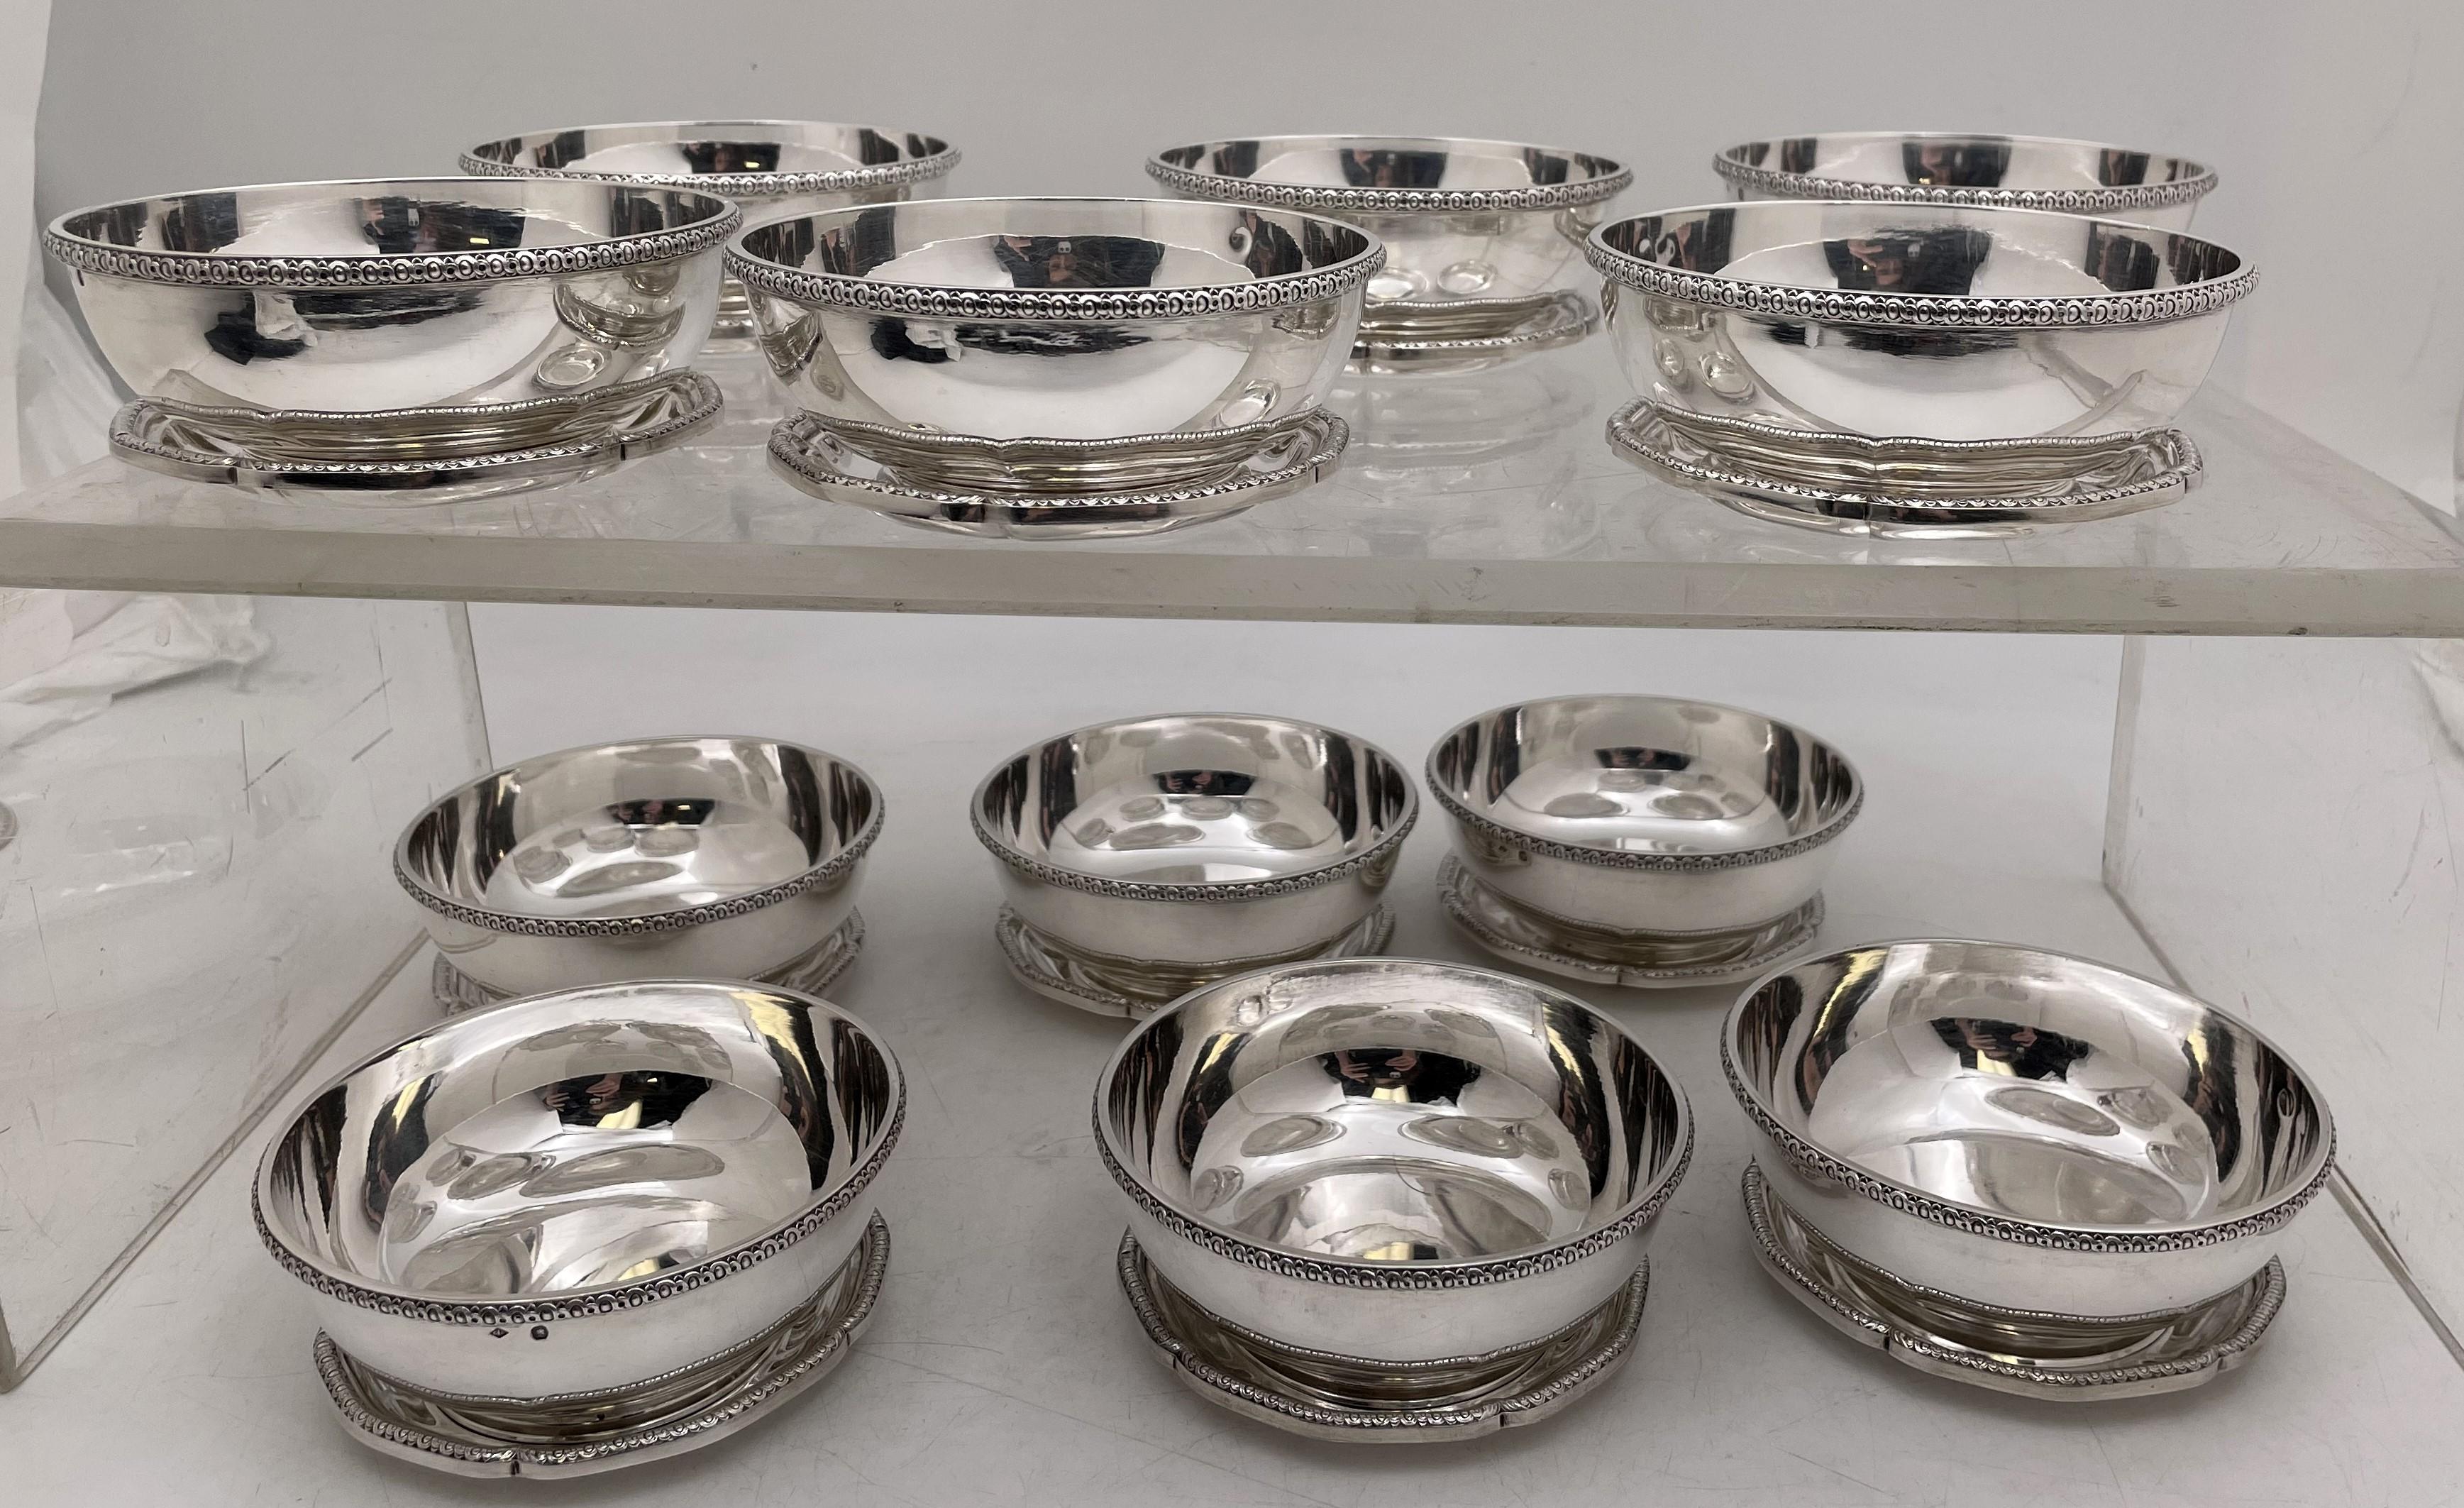 Puiforcat, French 0.950 (higher purity than sterling) silver set of 12 dessert / compote bowls with 12 matching underplates, with a beautiful, curvilinear design, and rims adorned with stylized geometric motifs. The bowls measure 4 1/4'' in diameter